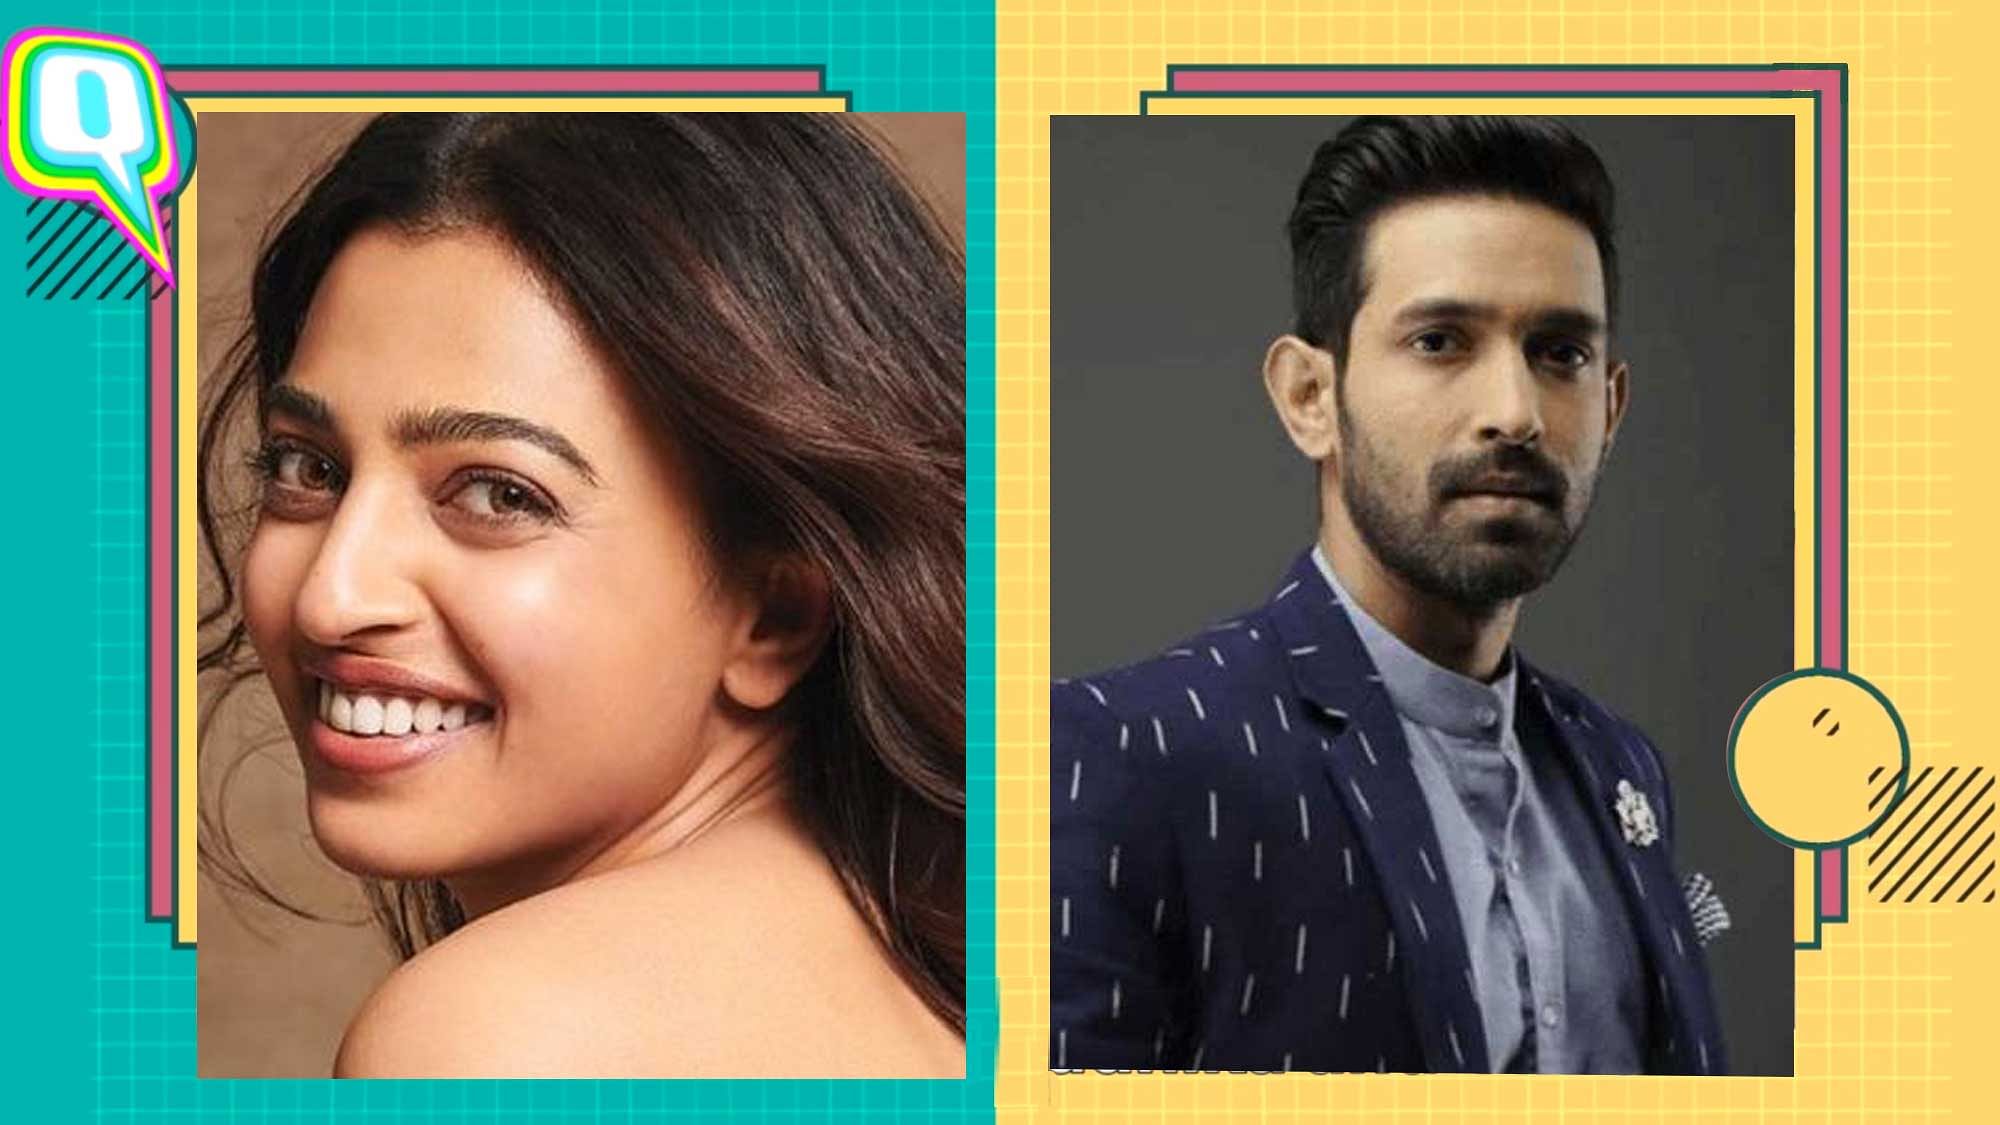 Has Vikrant Massey replaced the position of 'omnipresent' Radhika Apte? Watch them battle it out.